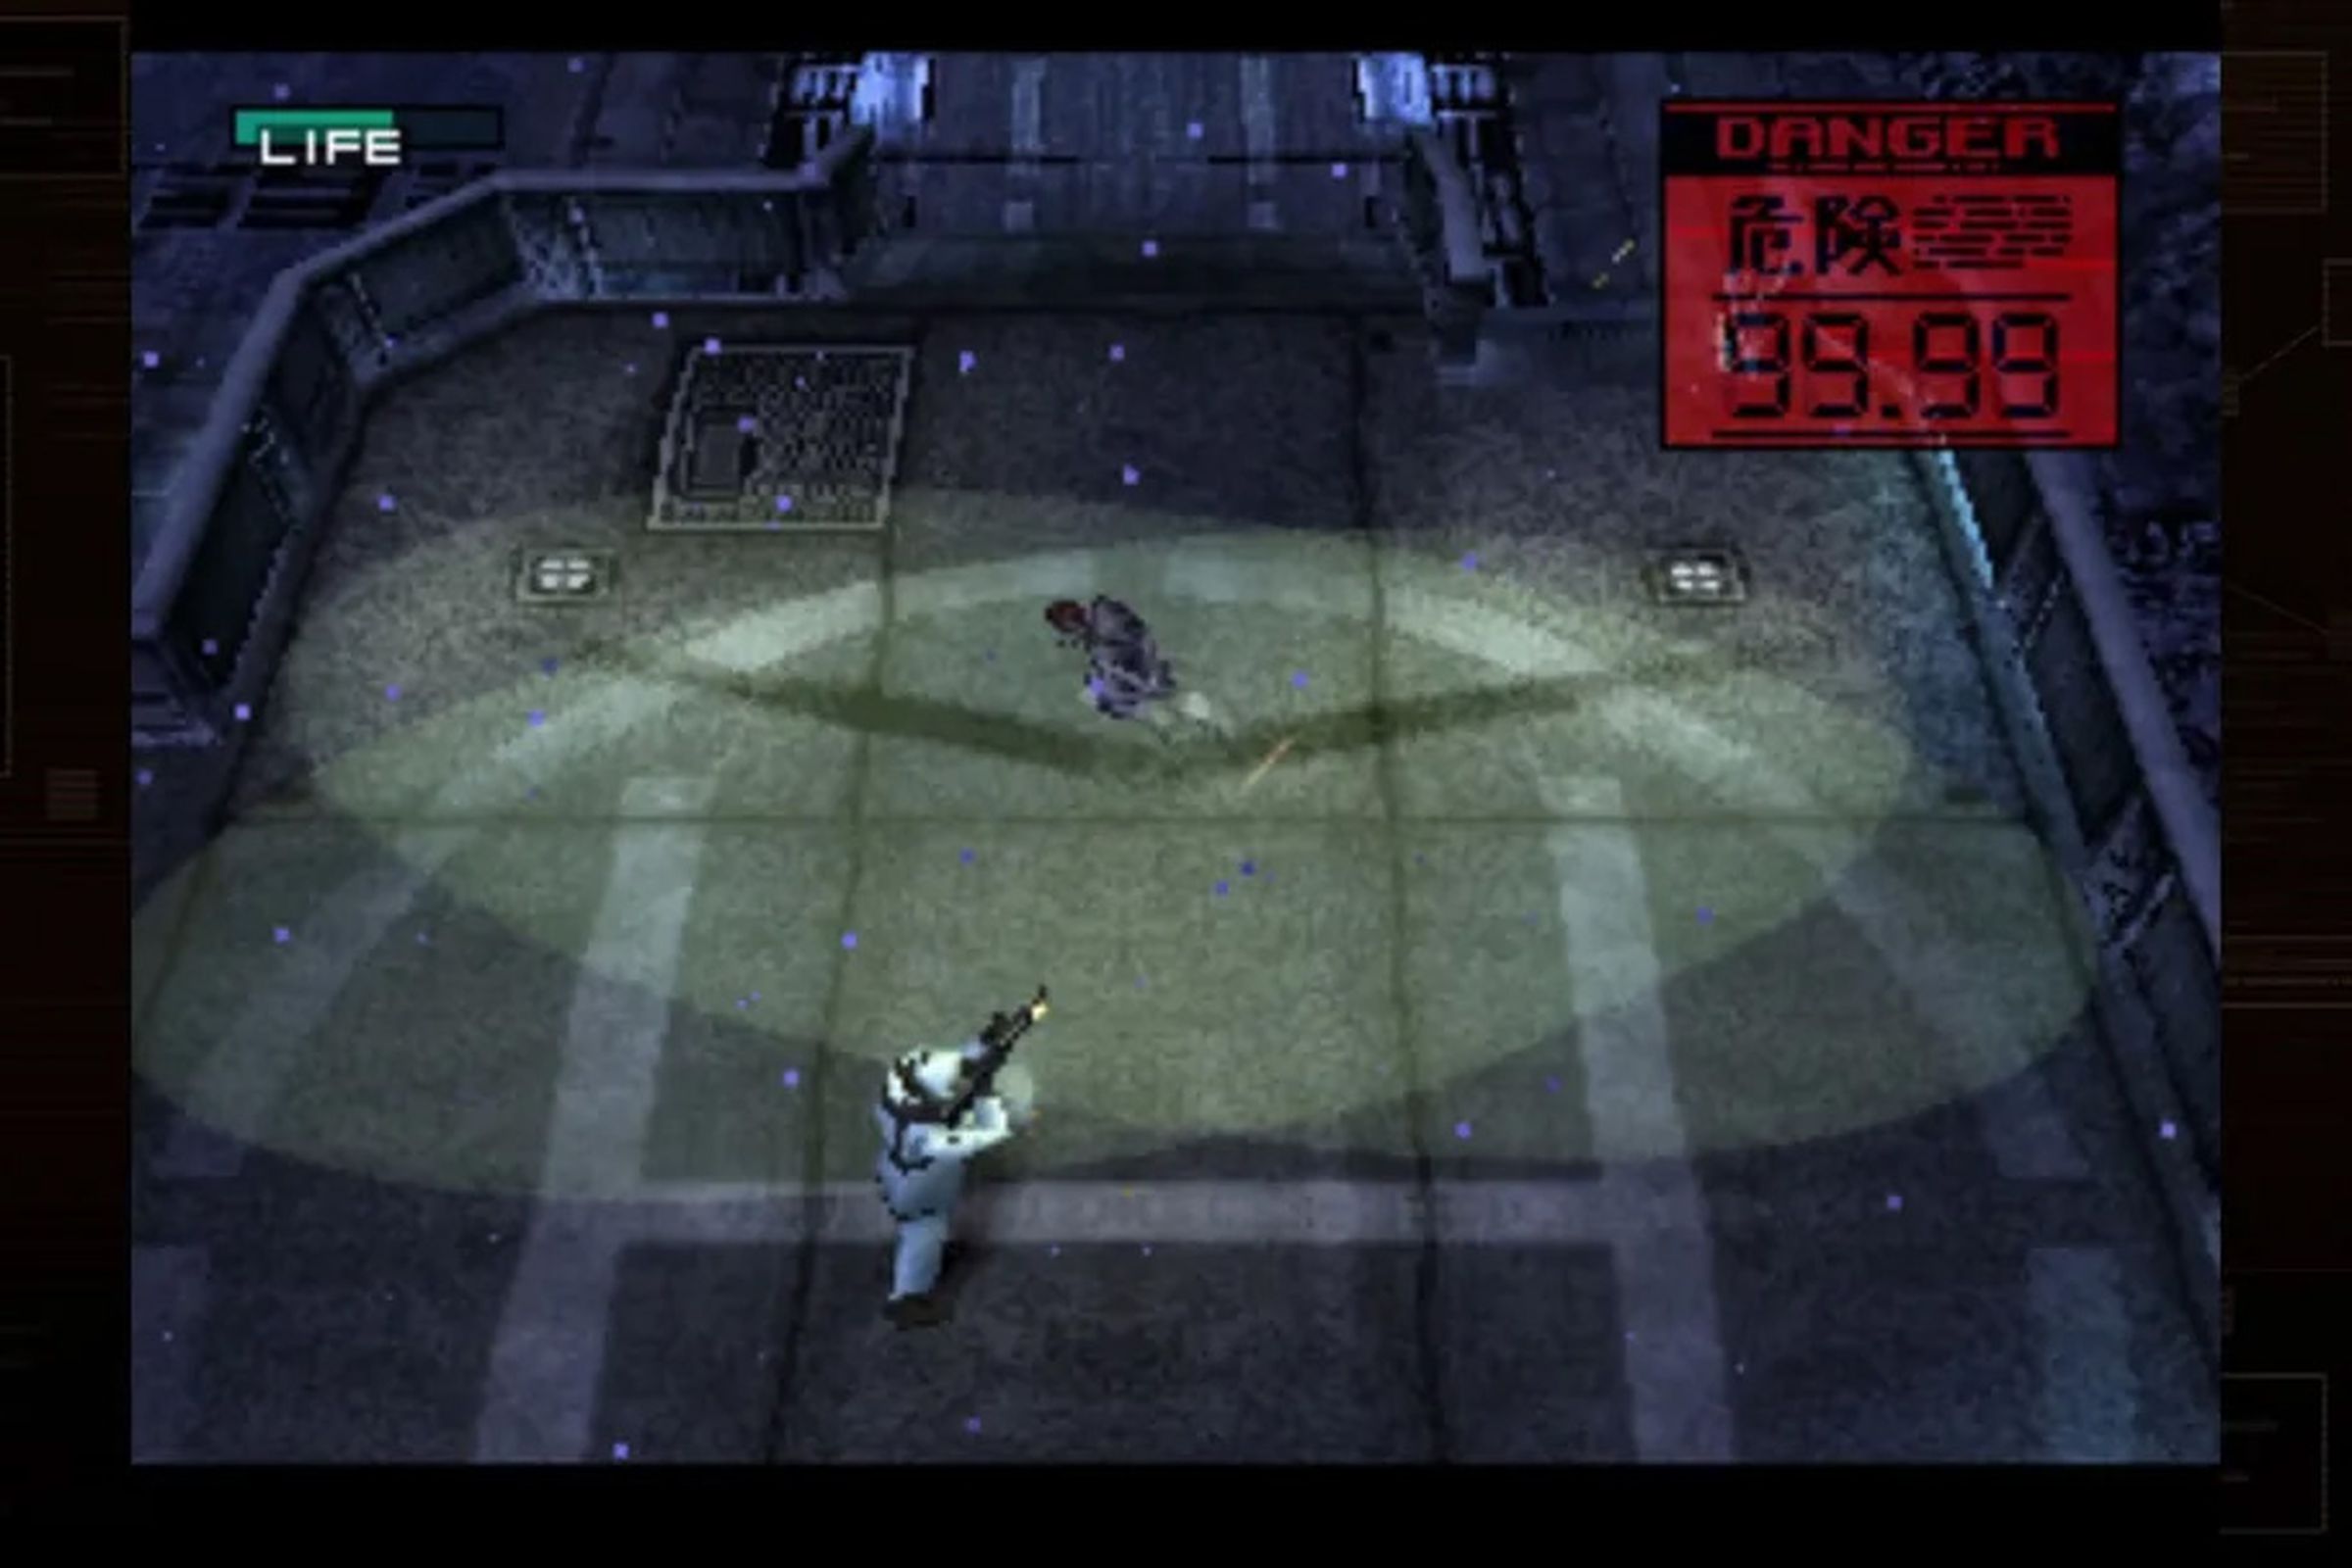 Solid Snake being chased across a helipad.